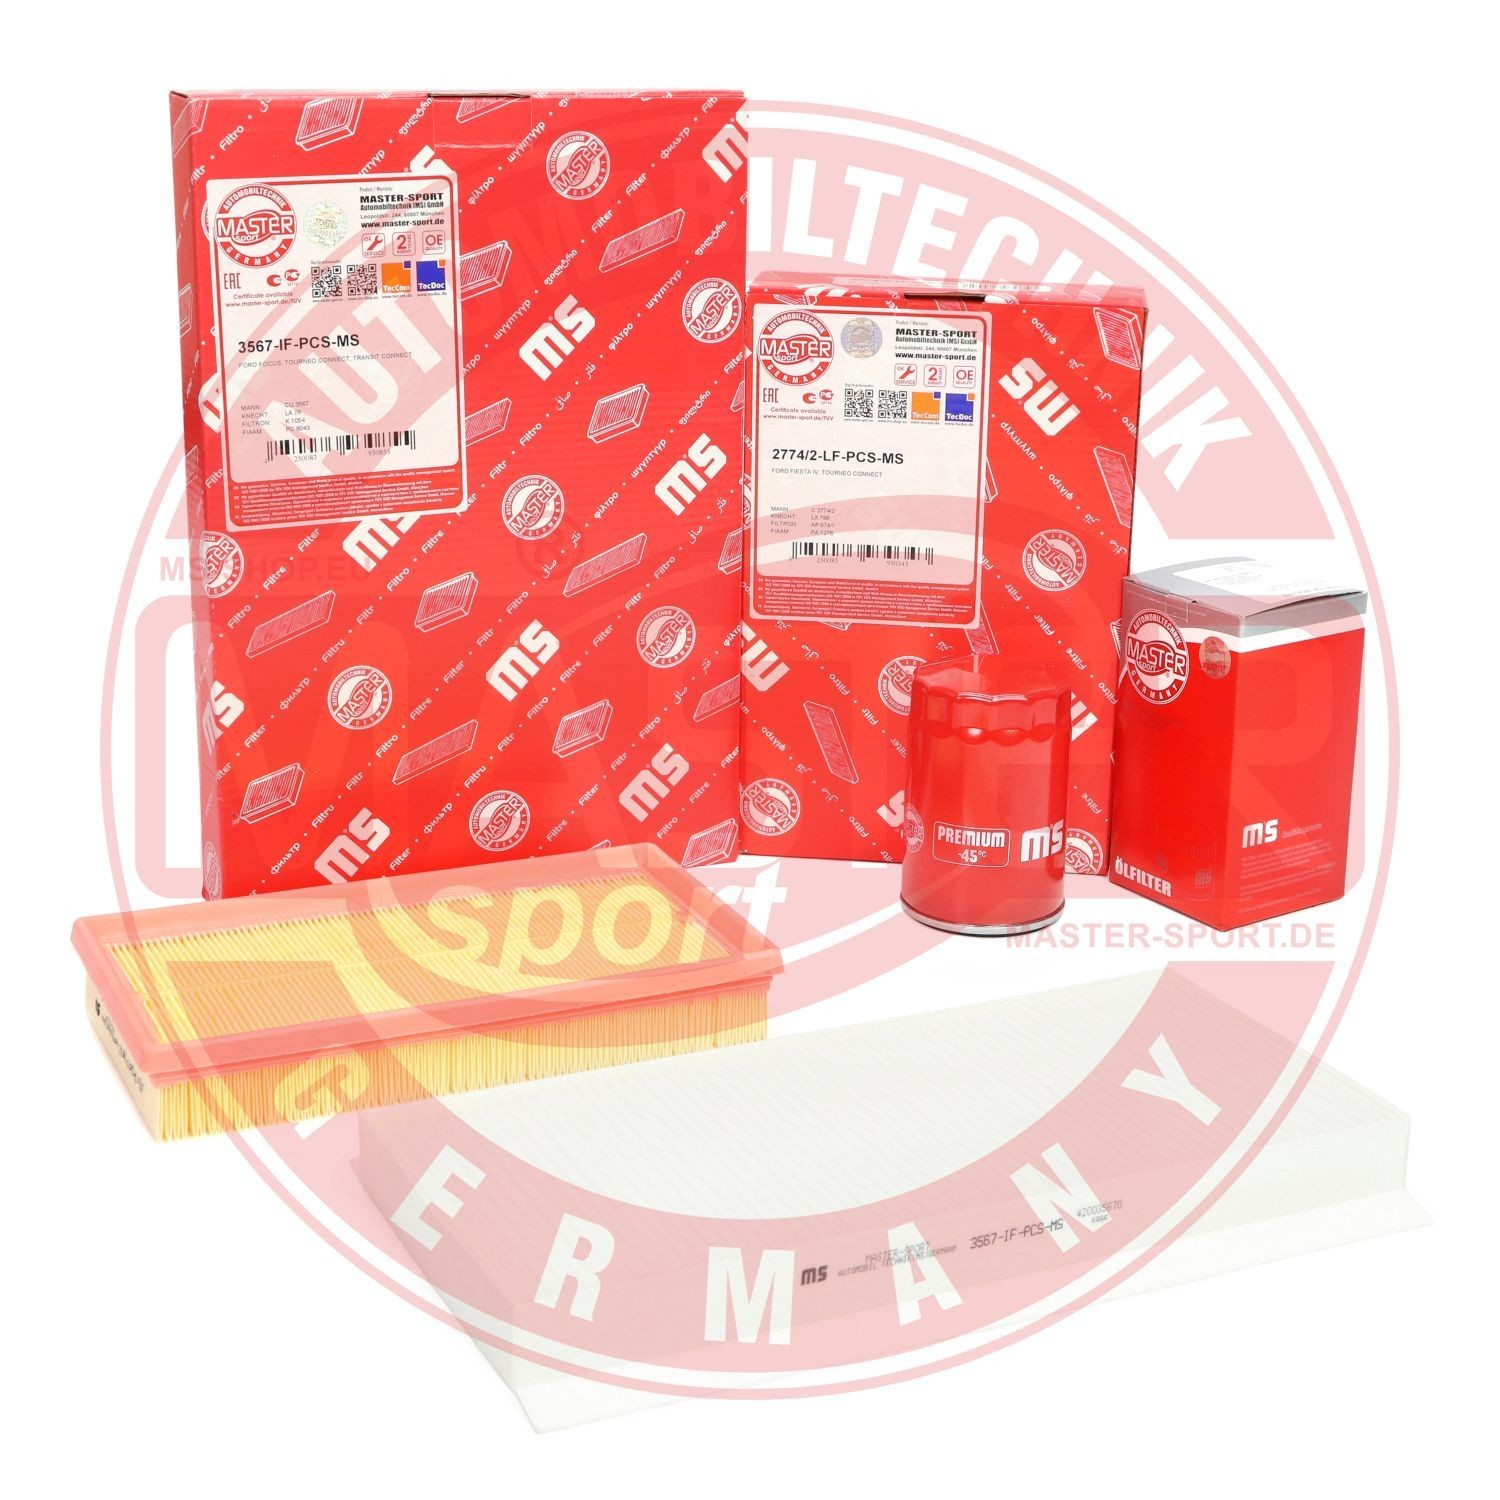 Ford Filter kit MASTER-SPORT 450001842 at a good price